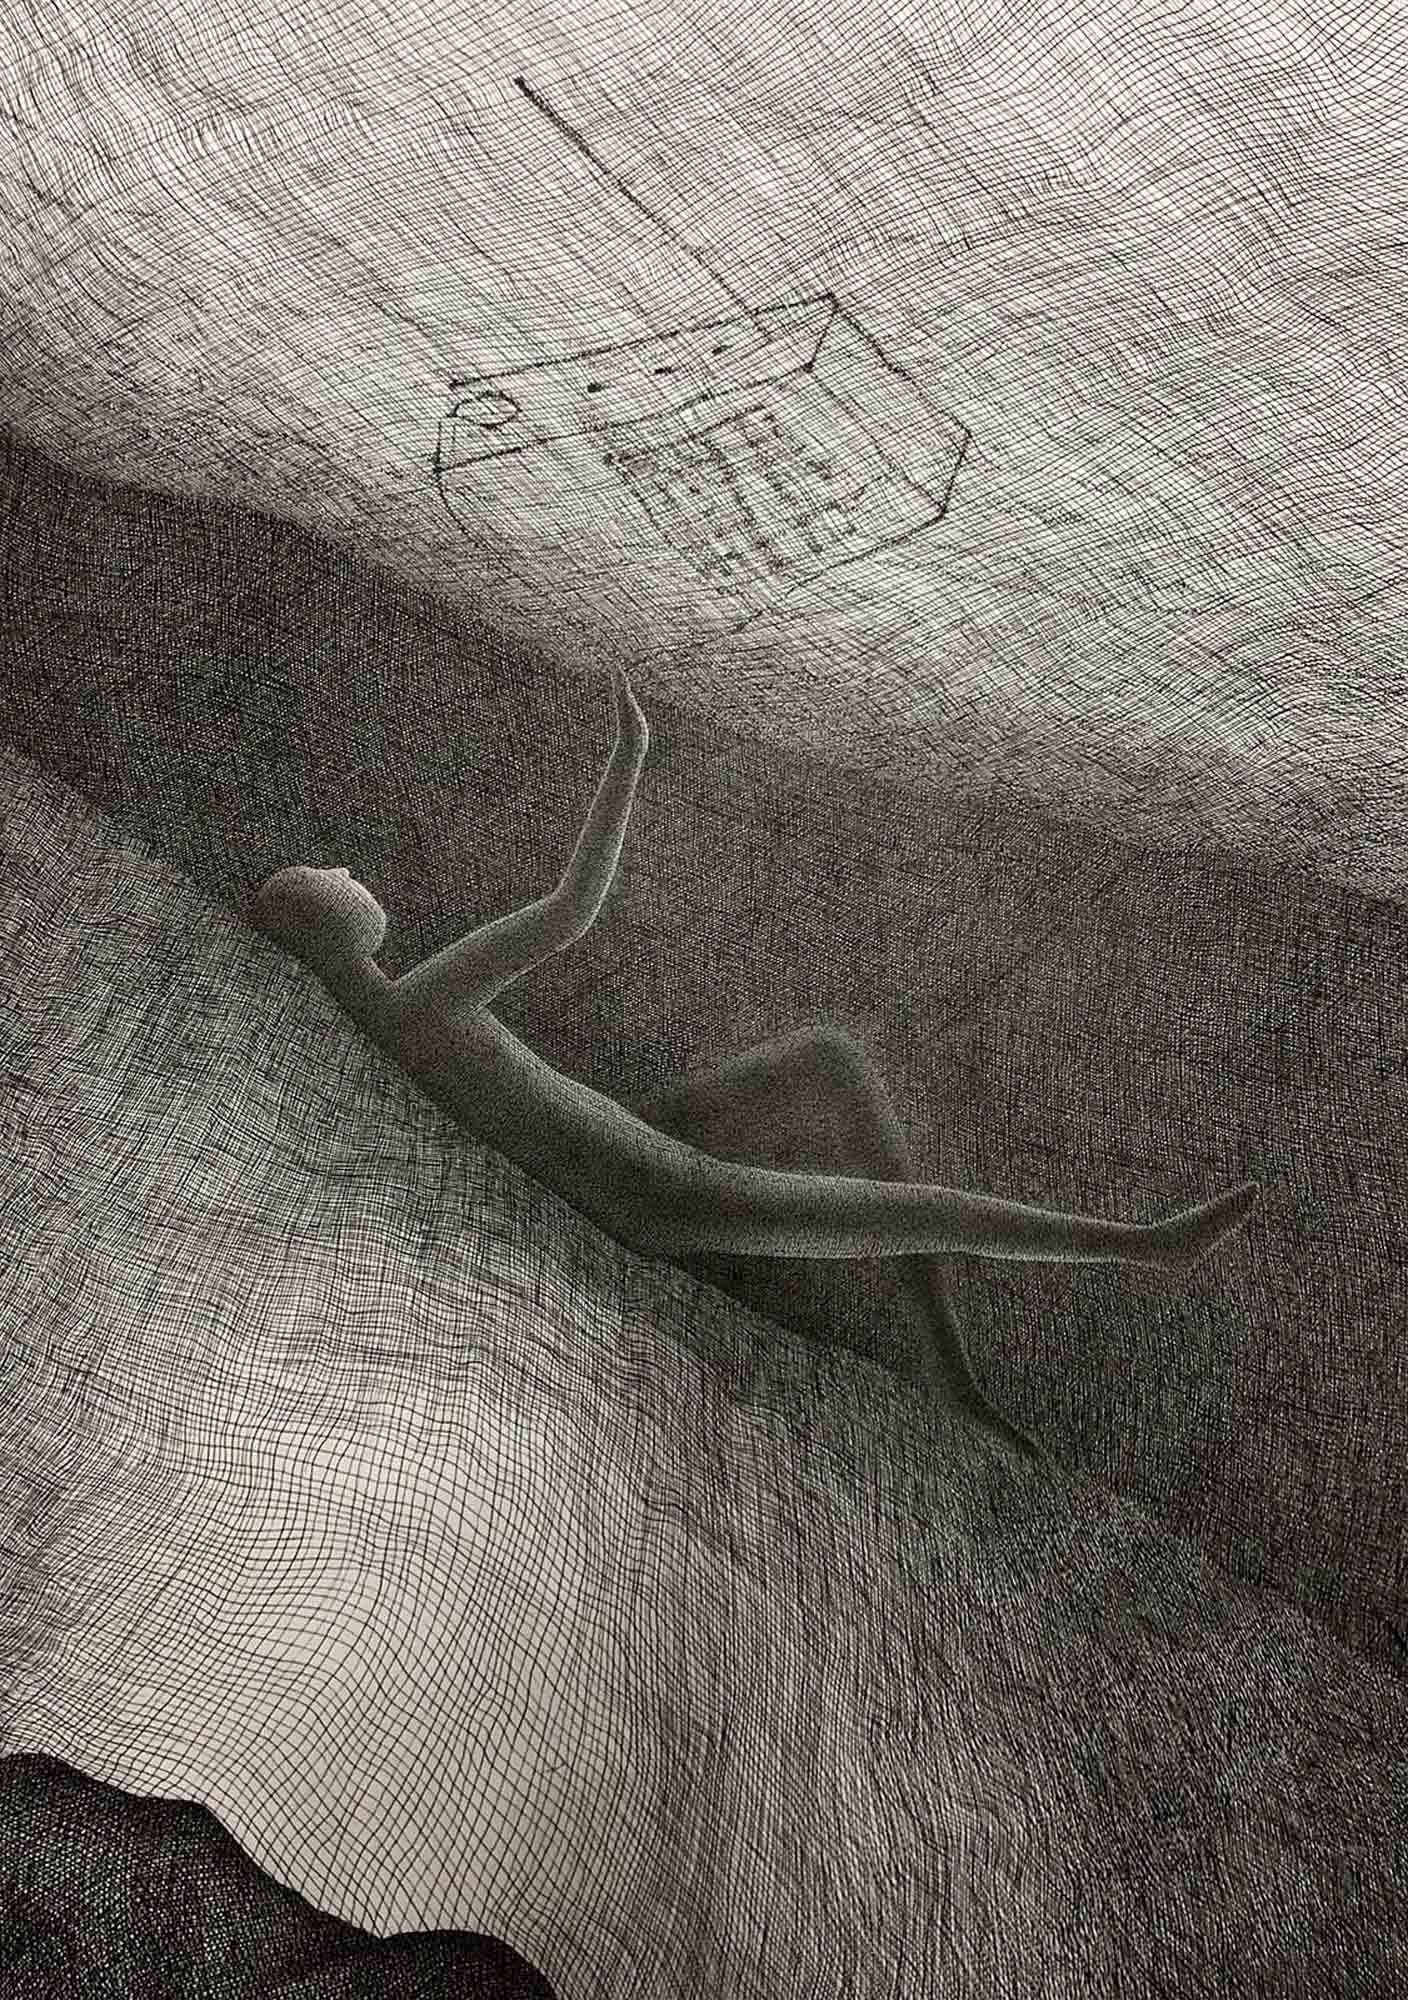 Mark Alexander's pen and ink art: supine figure in a cave with wavy patterns and a sketched old radio above.